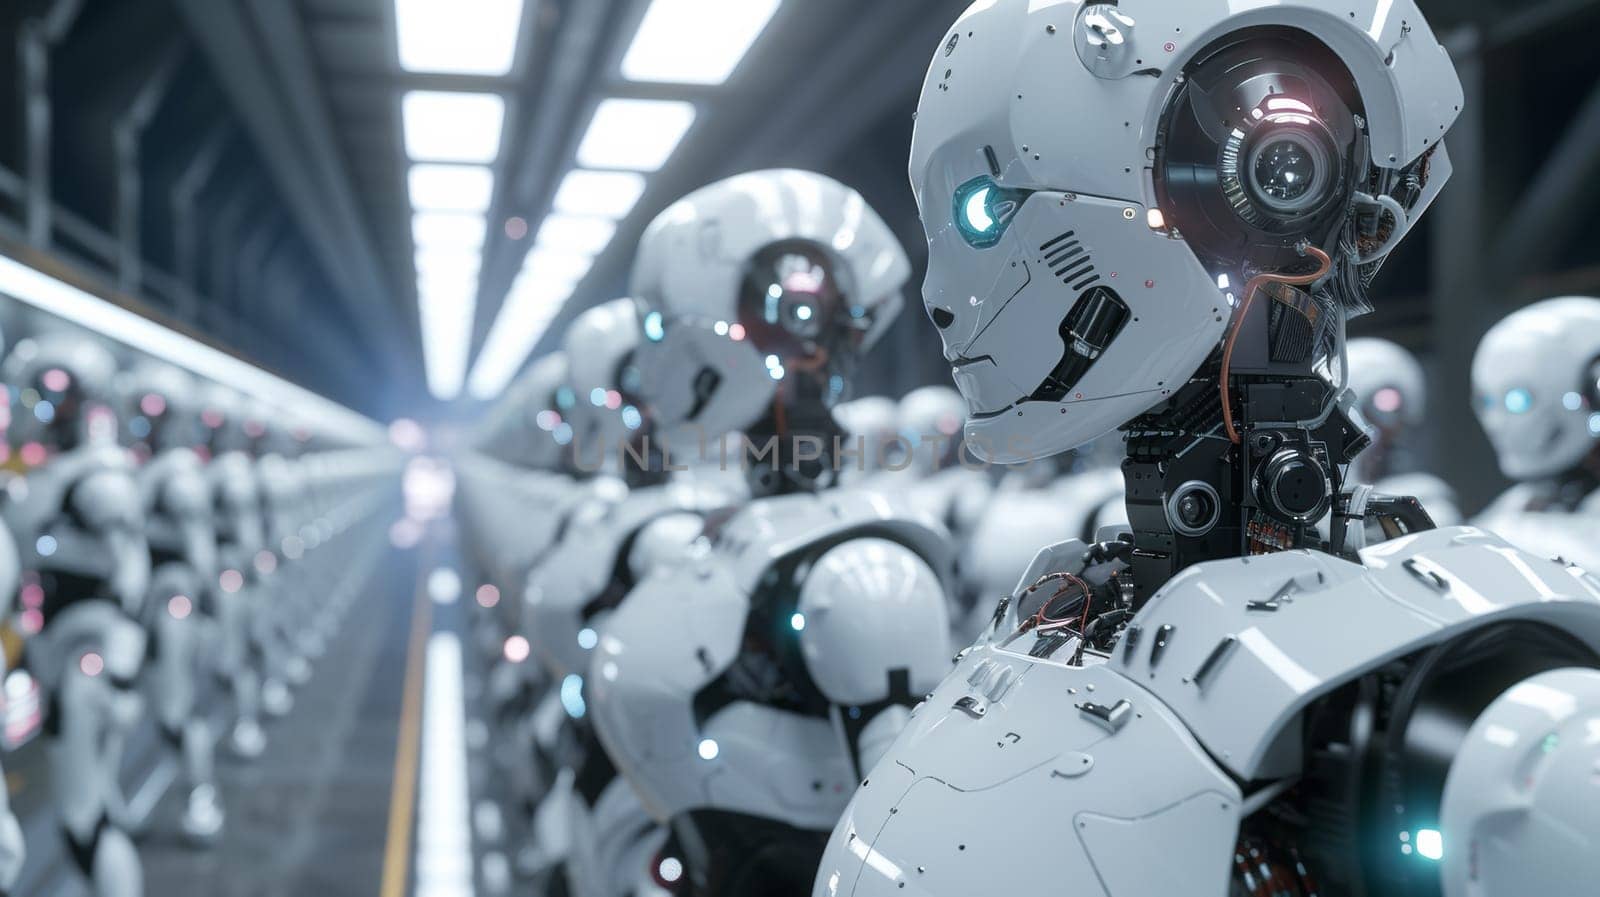 A row of robots lined up in a warehouse with lights on, AI by starush